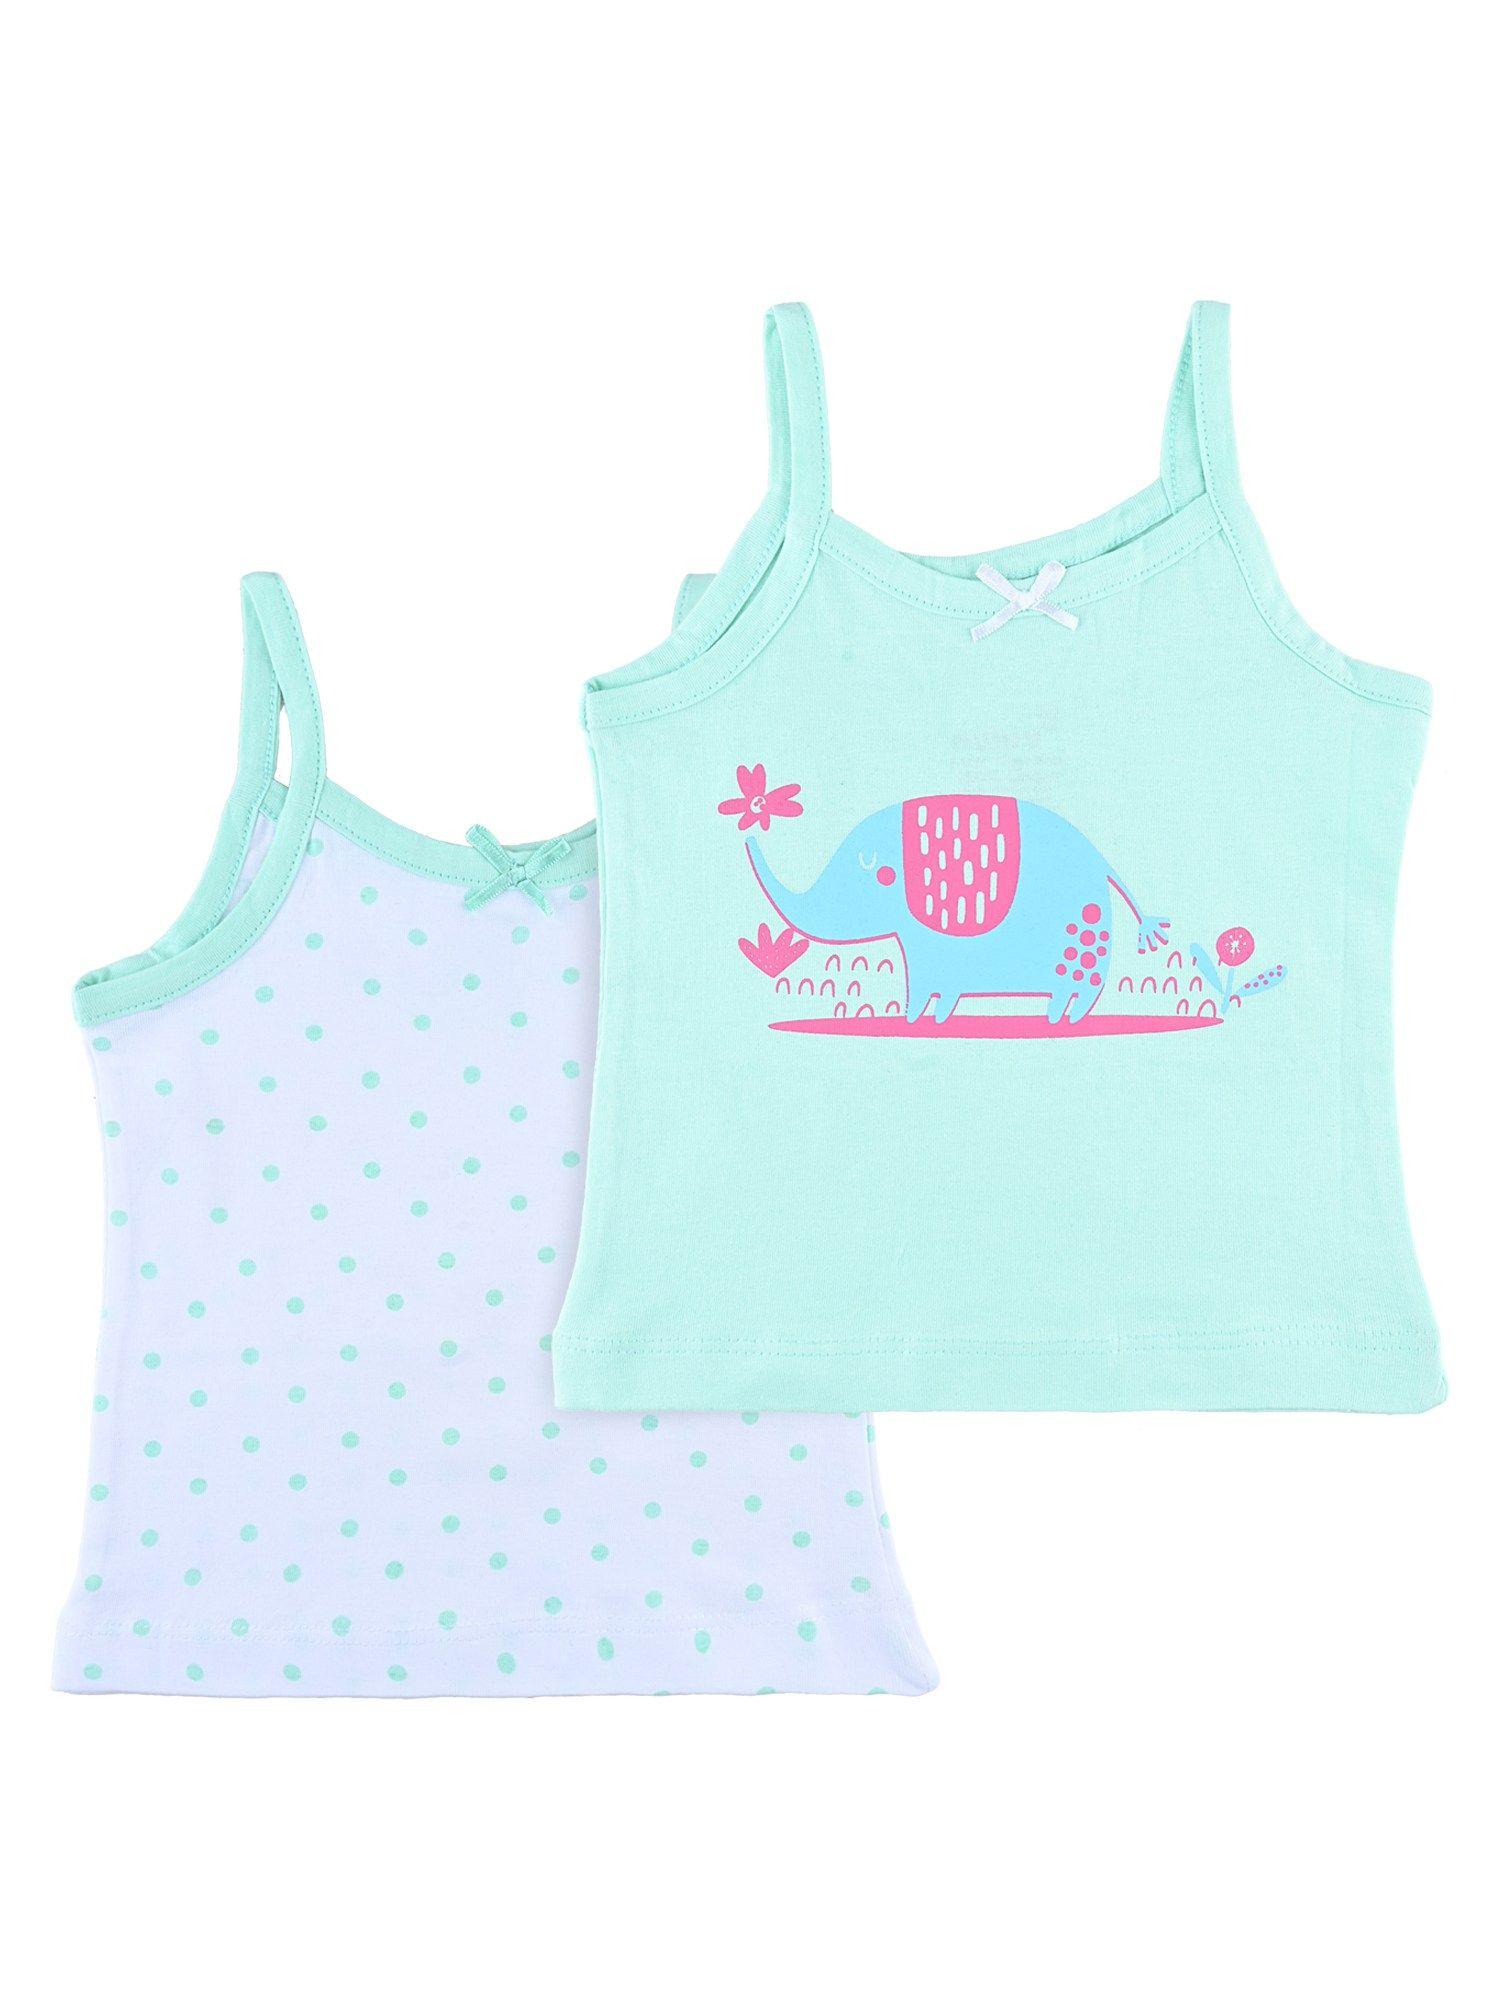 girls-cotton-printed-multicolor-camisole-vest-(pack-of-2)